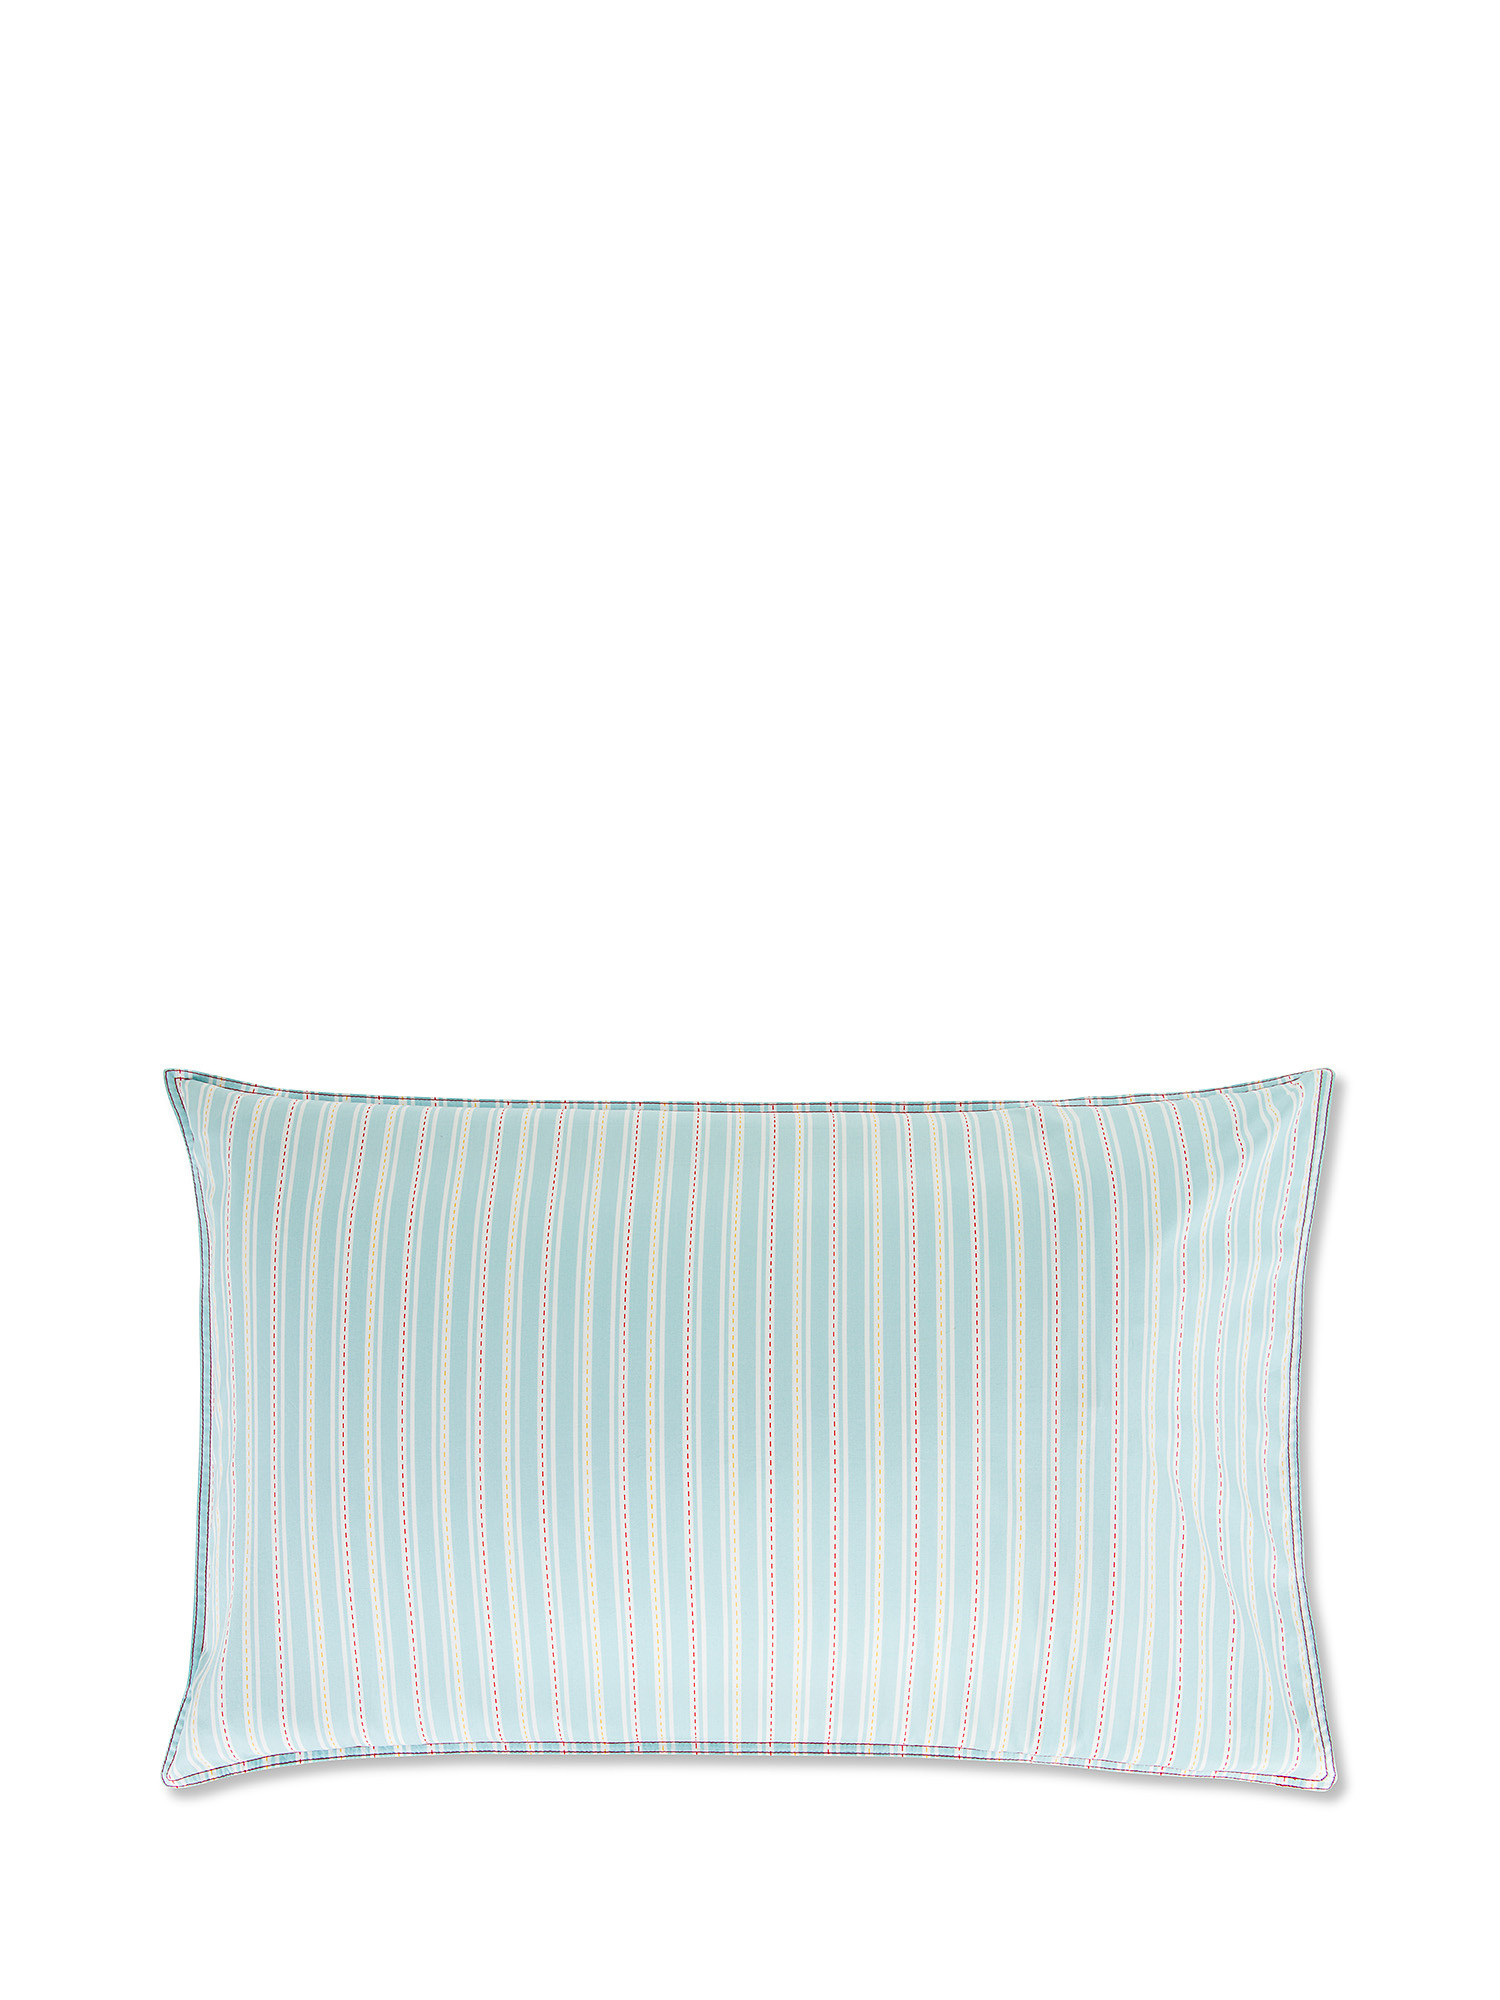 Striped patterned cotton percale pillowcase, Light Blue, large image number 0